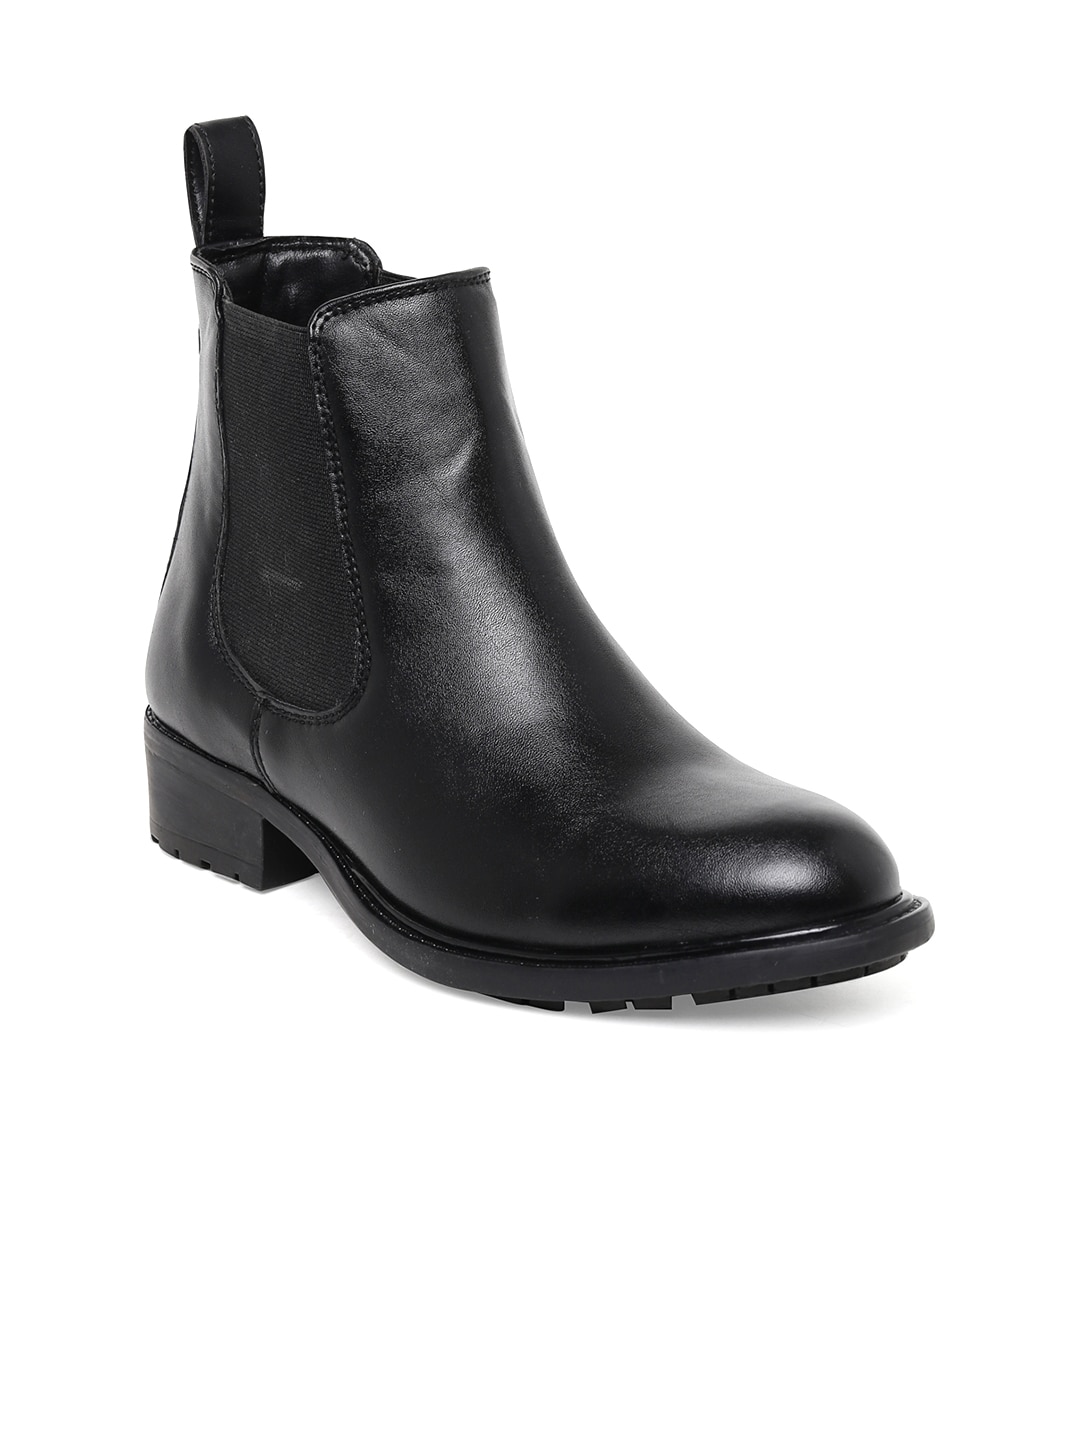 Bruno Manetti Women Black Solid High-Top Flat Boots Price in India